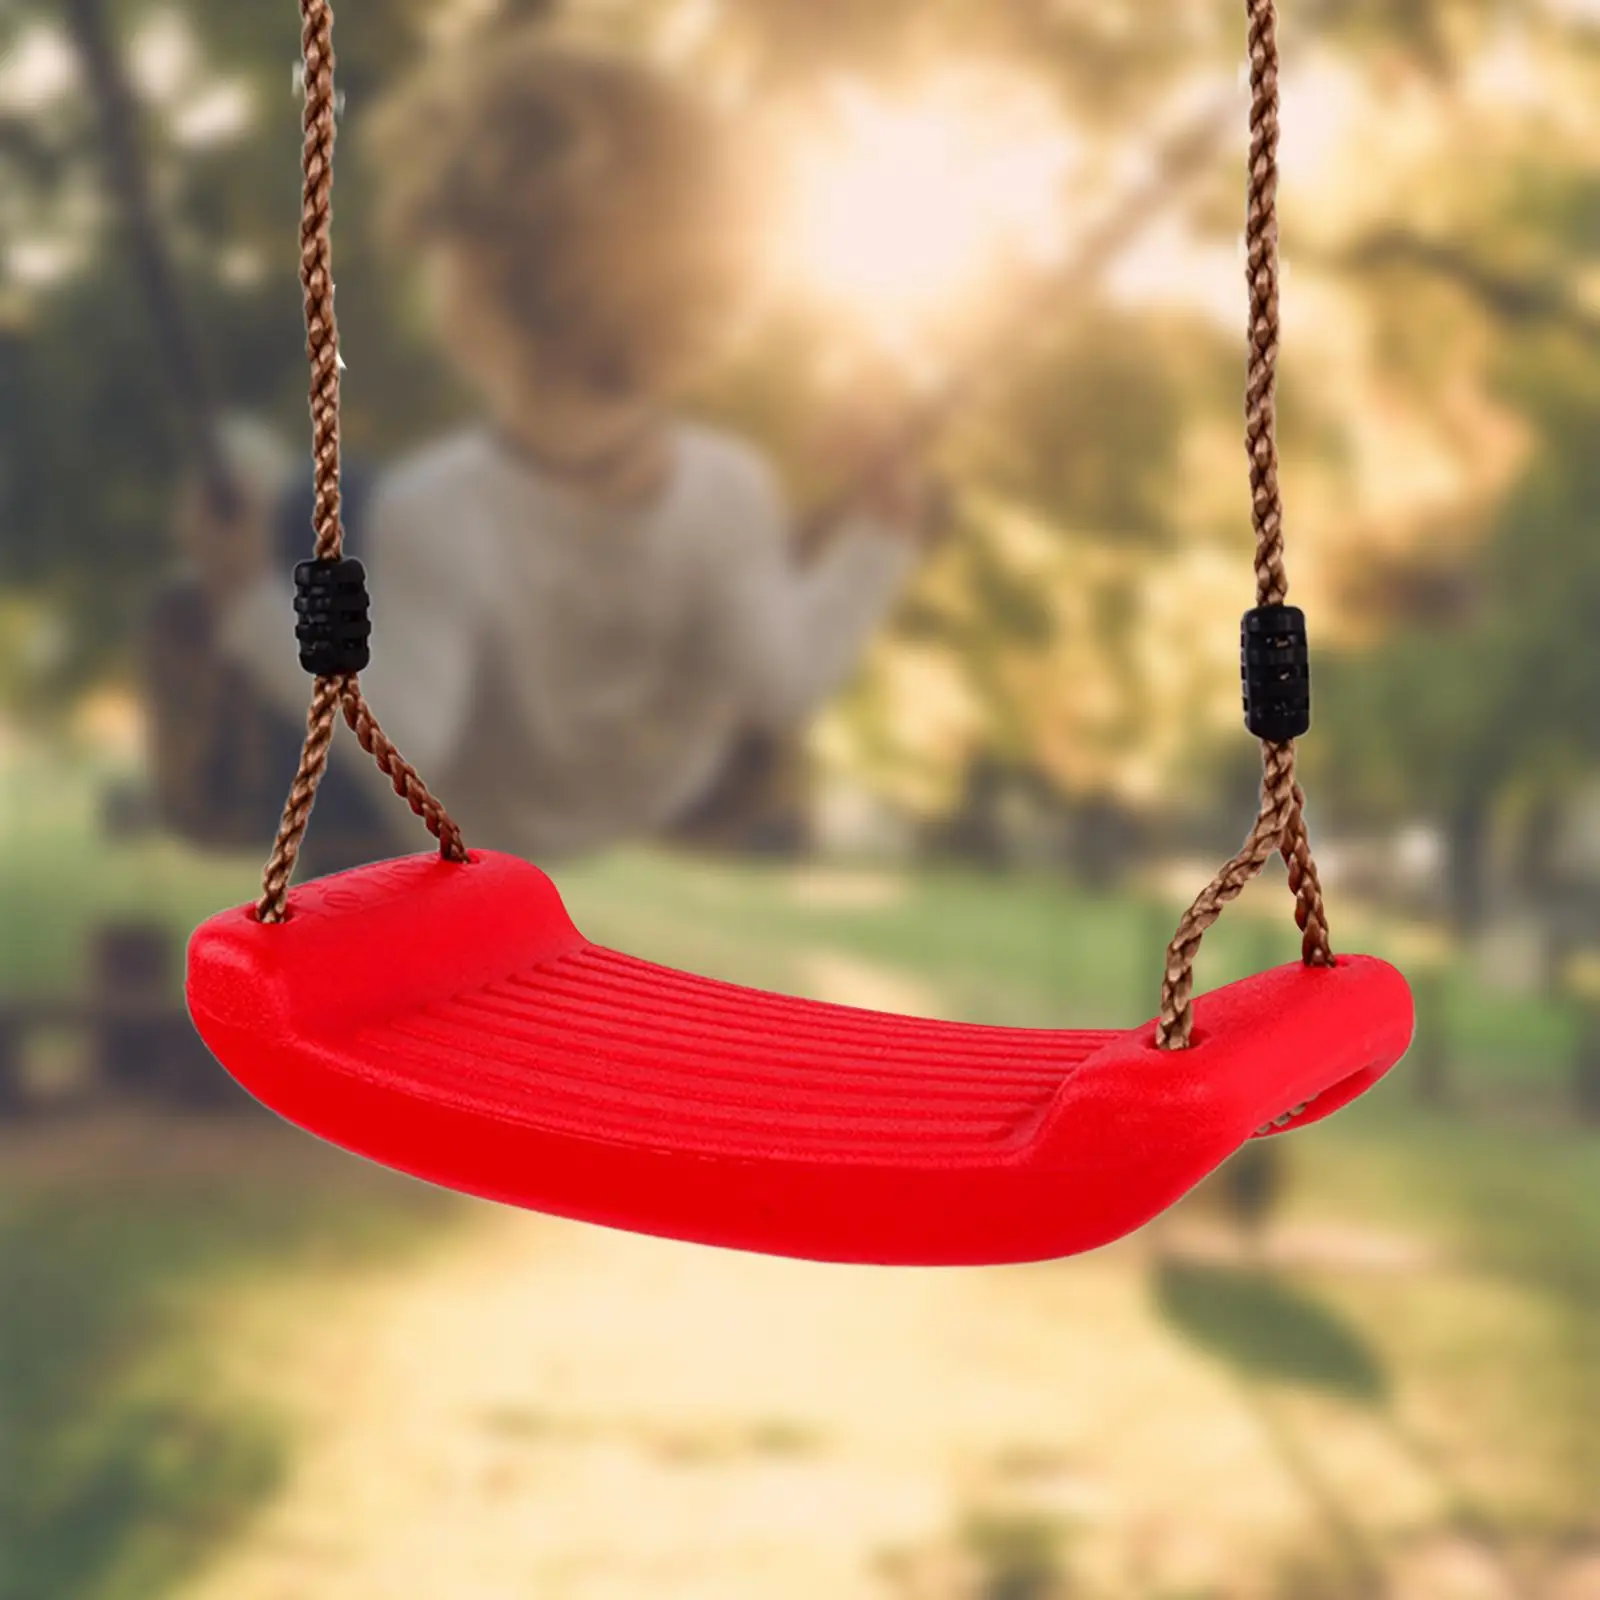 Hanging Children`s Swing Set Flying Toy Plastic Swing Seat Curved Board Swing Chair for Indoor Outdoor Yard Home Tree Backyard